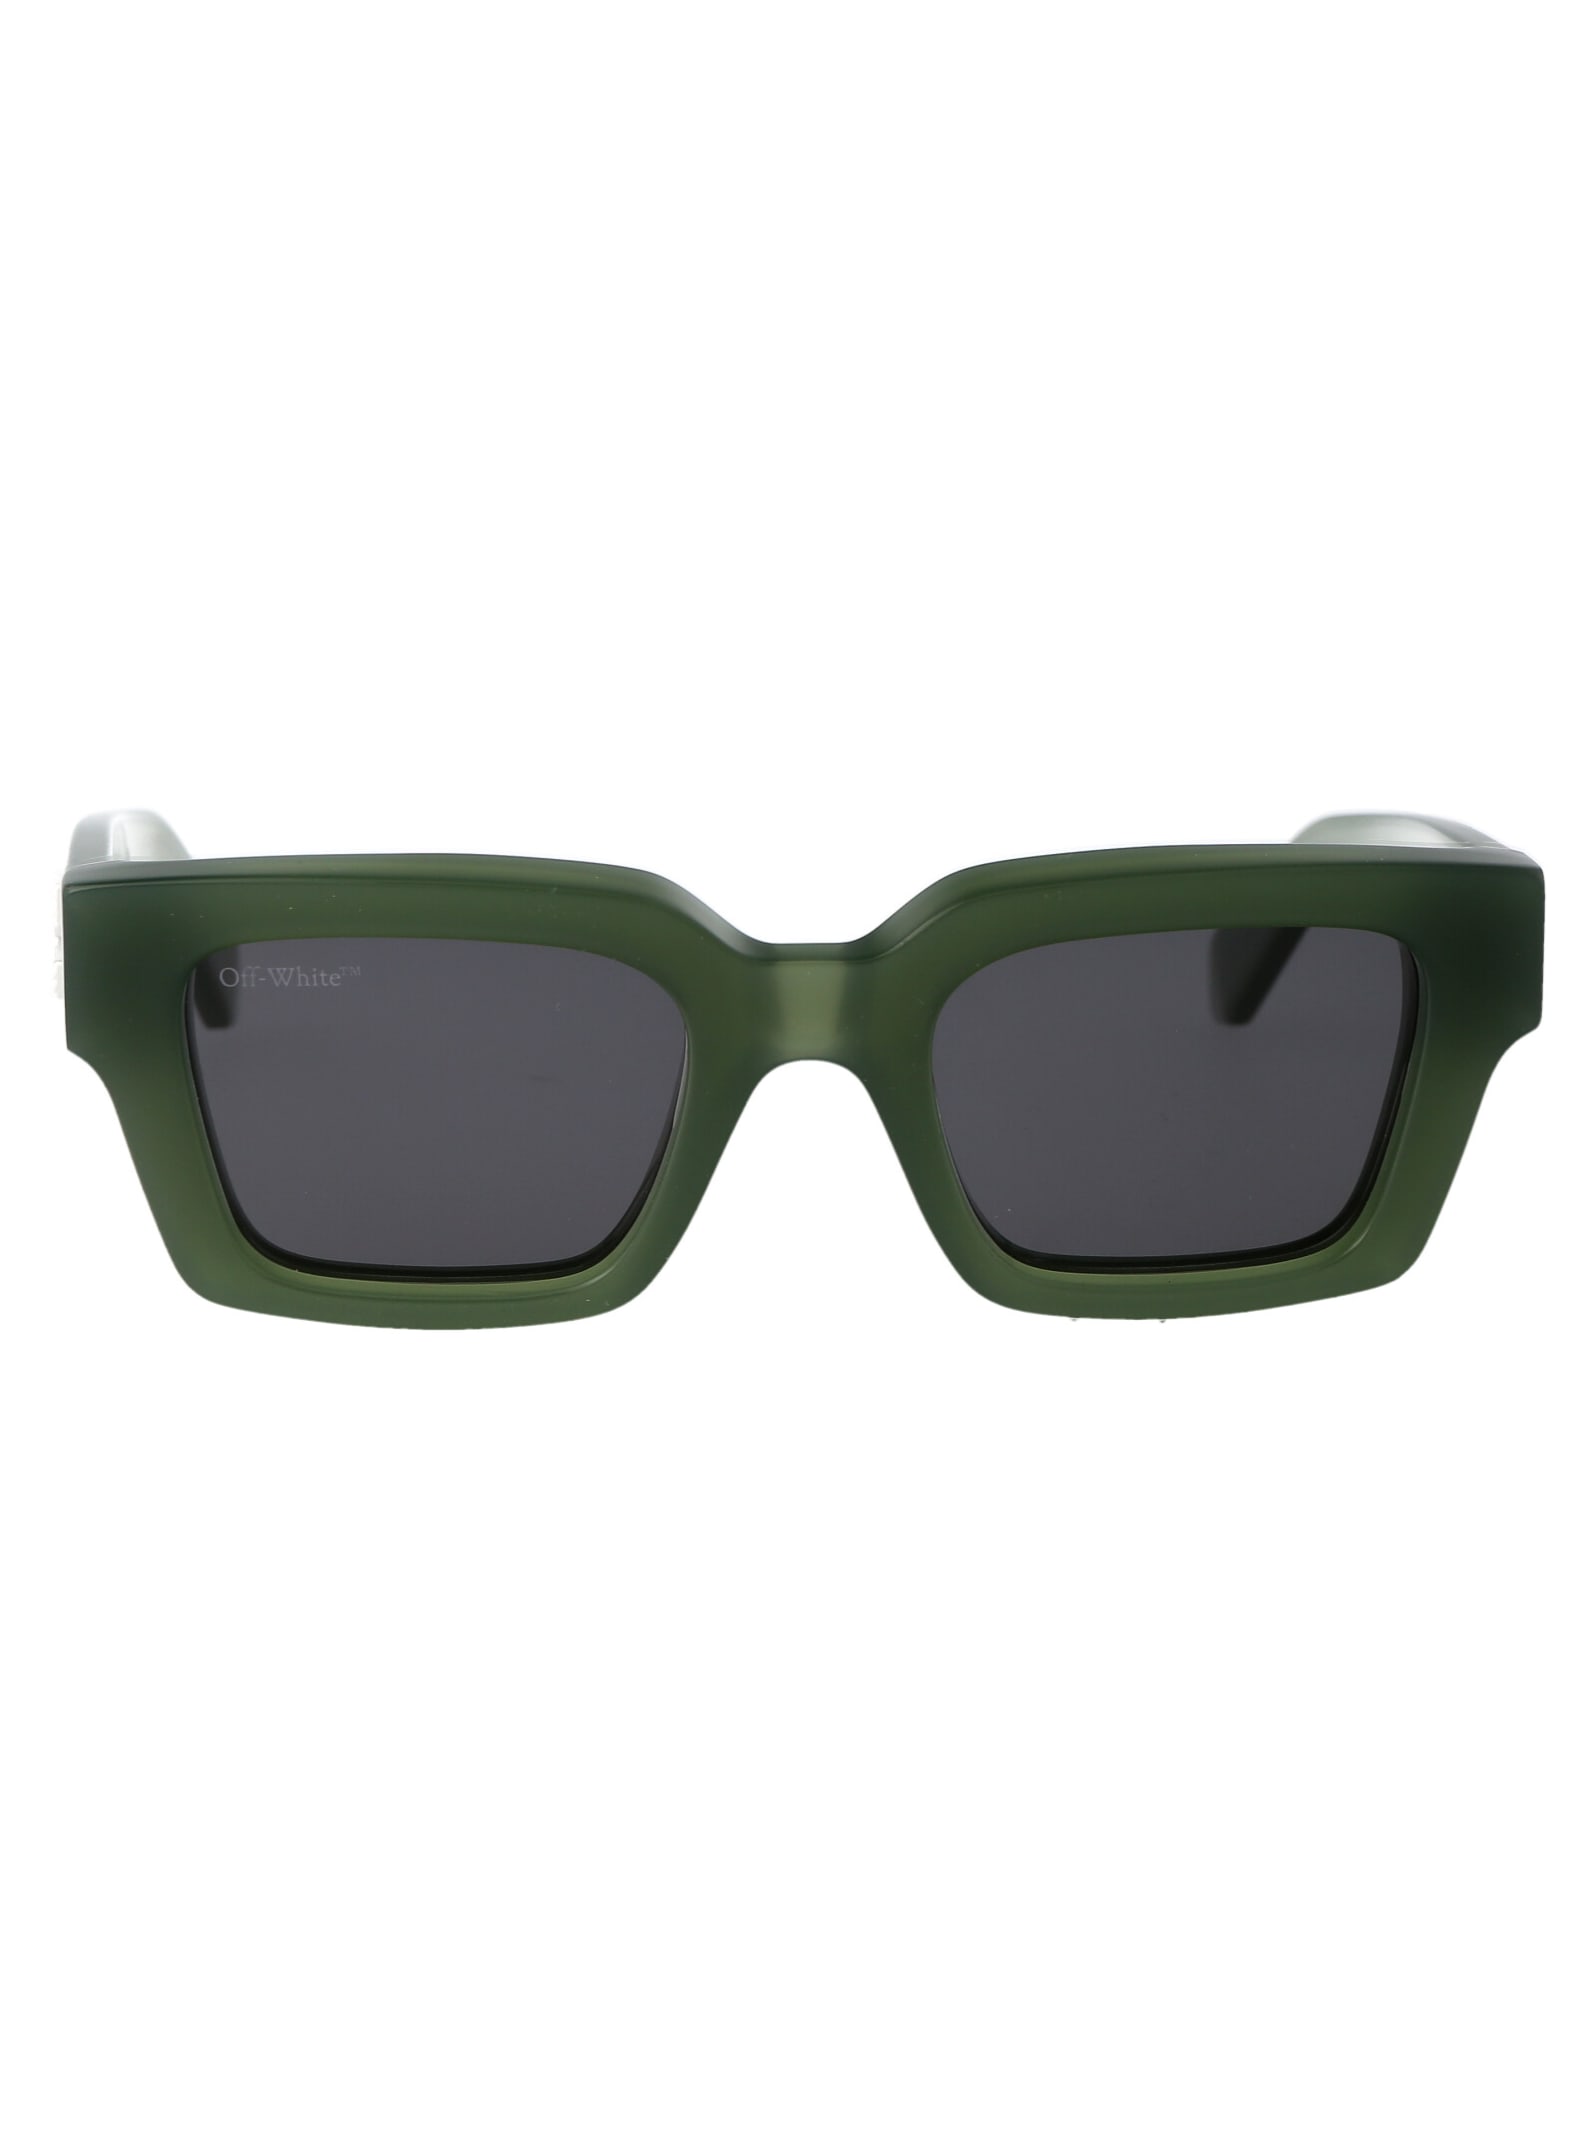 Off-white Virgil Sunglasses In 5507 Sage Green